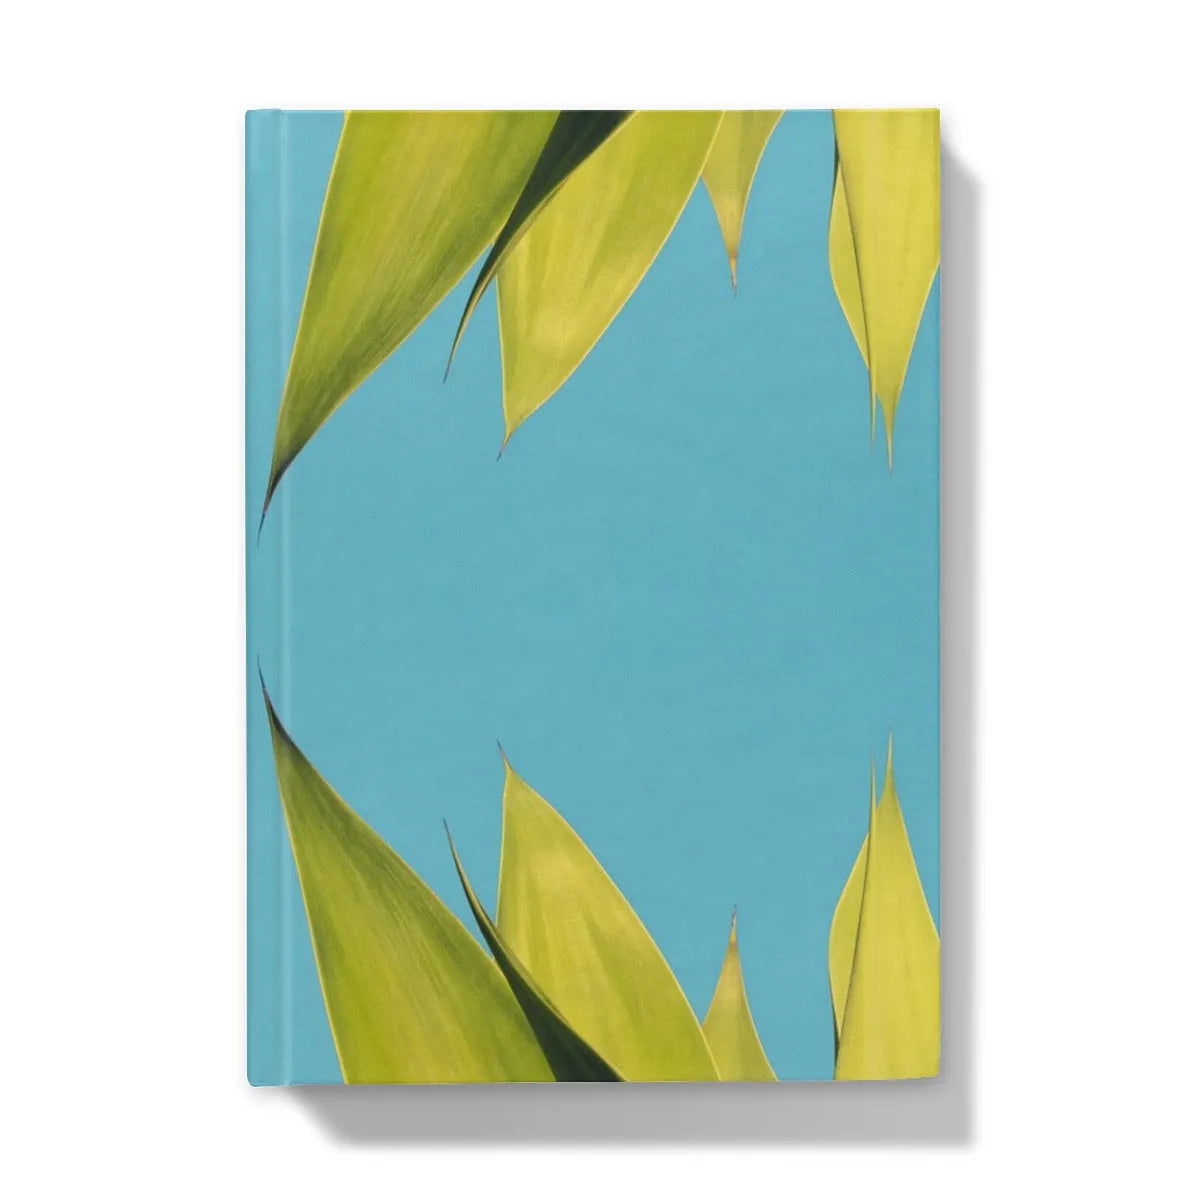 In Bloom Hardback Journal - 5’x7’ / 5’ x 7’ - Lined Paper - Notebooks & Notepads - Aesthetic Art